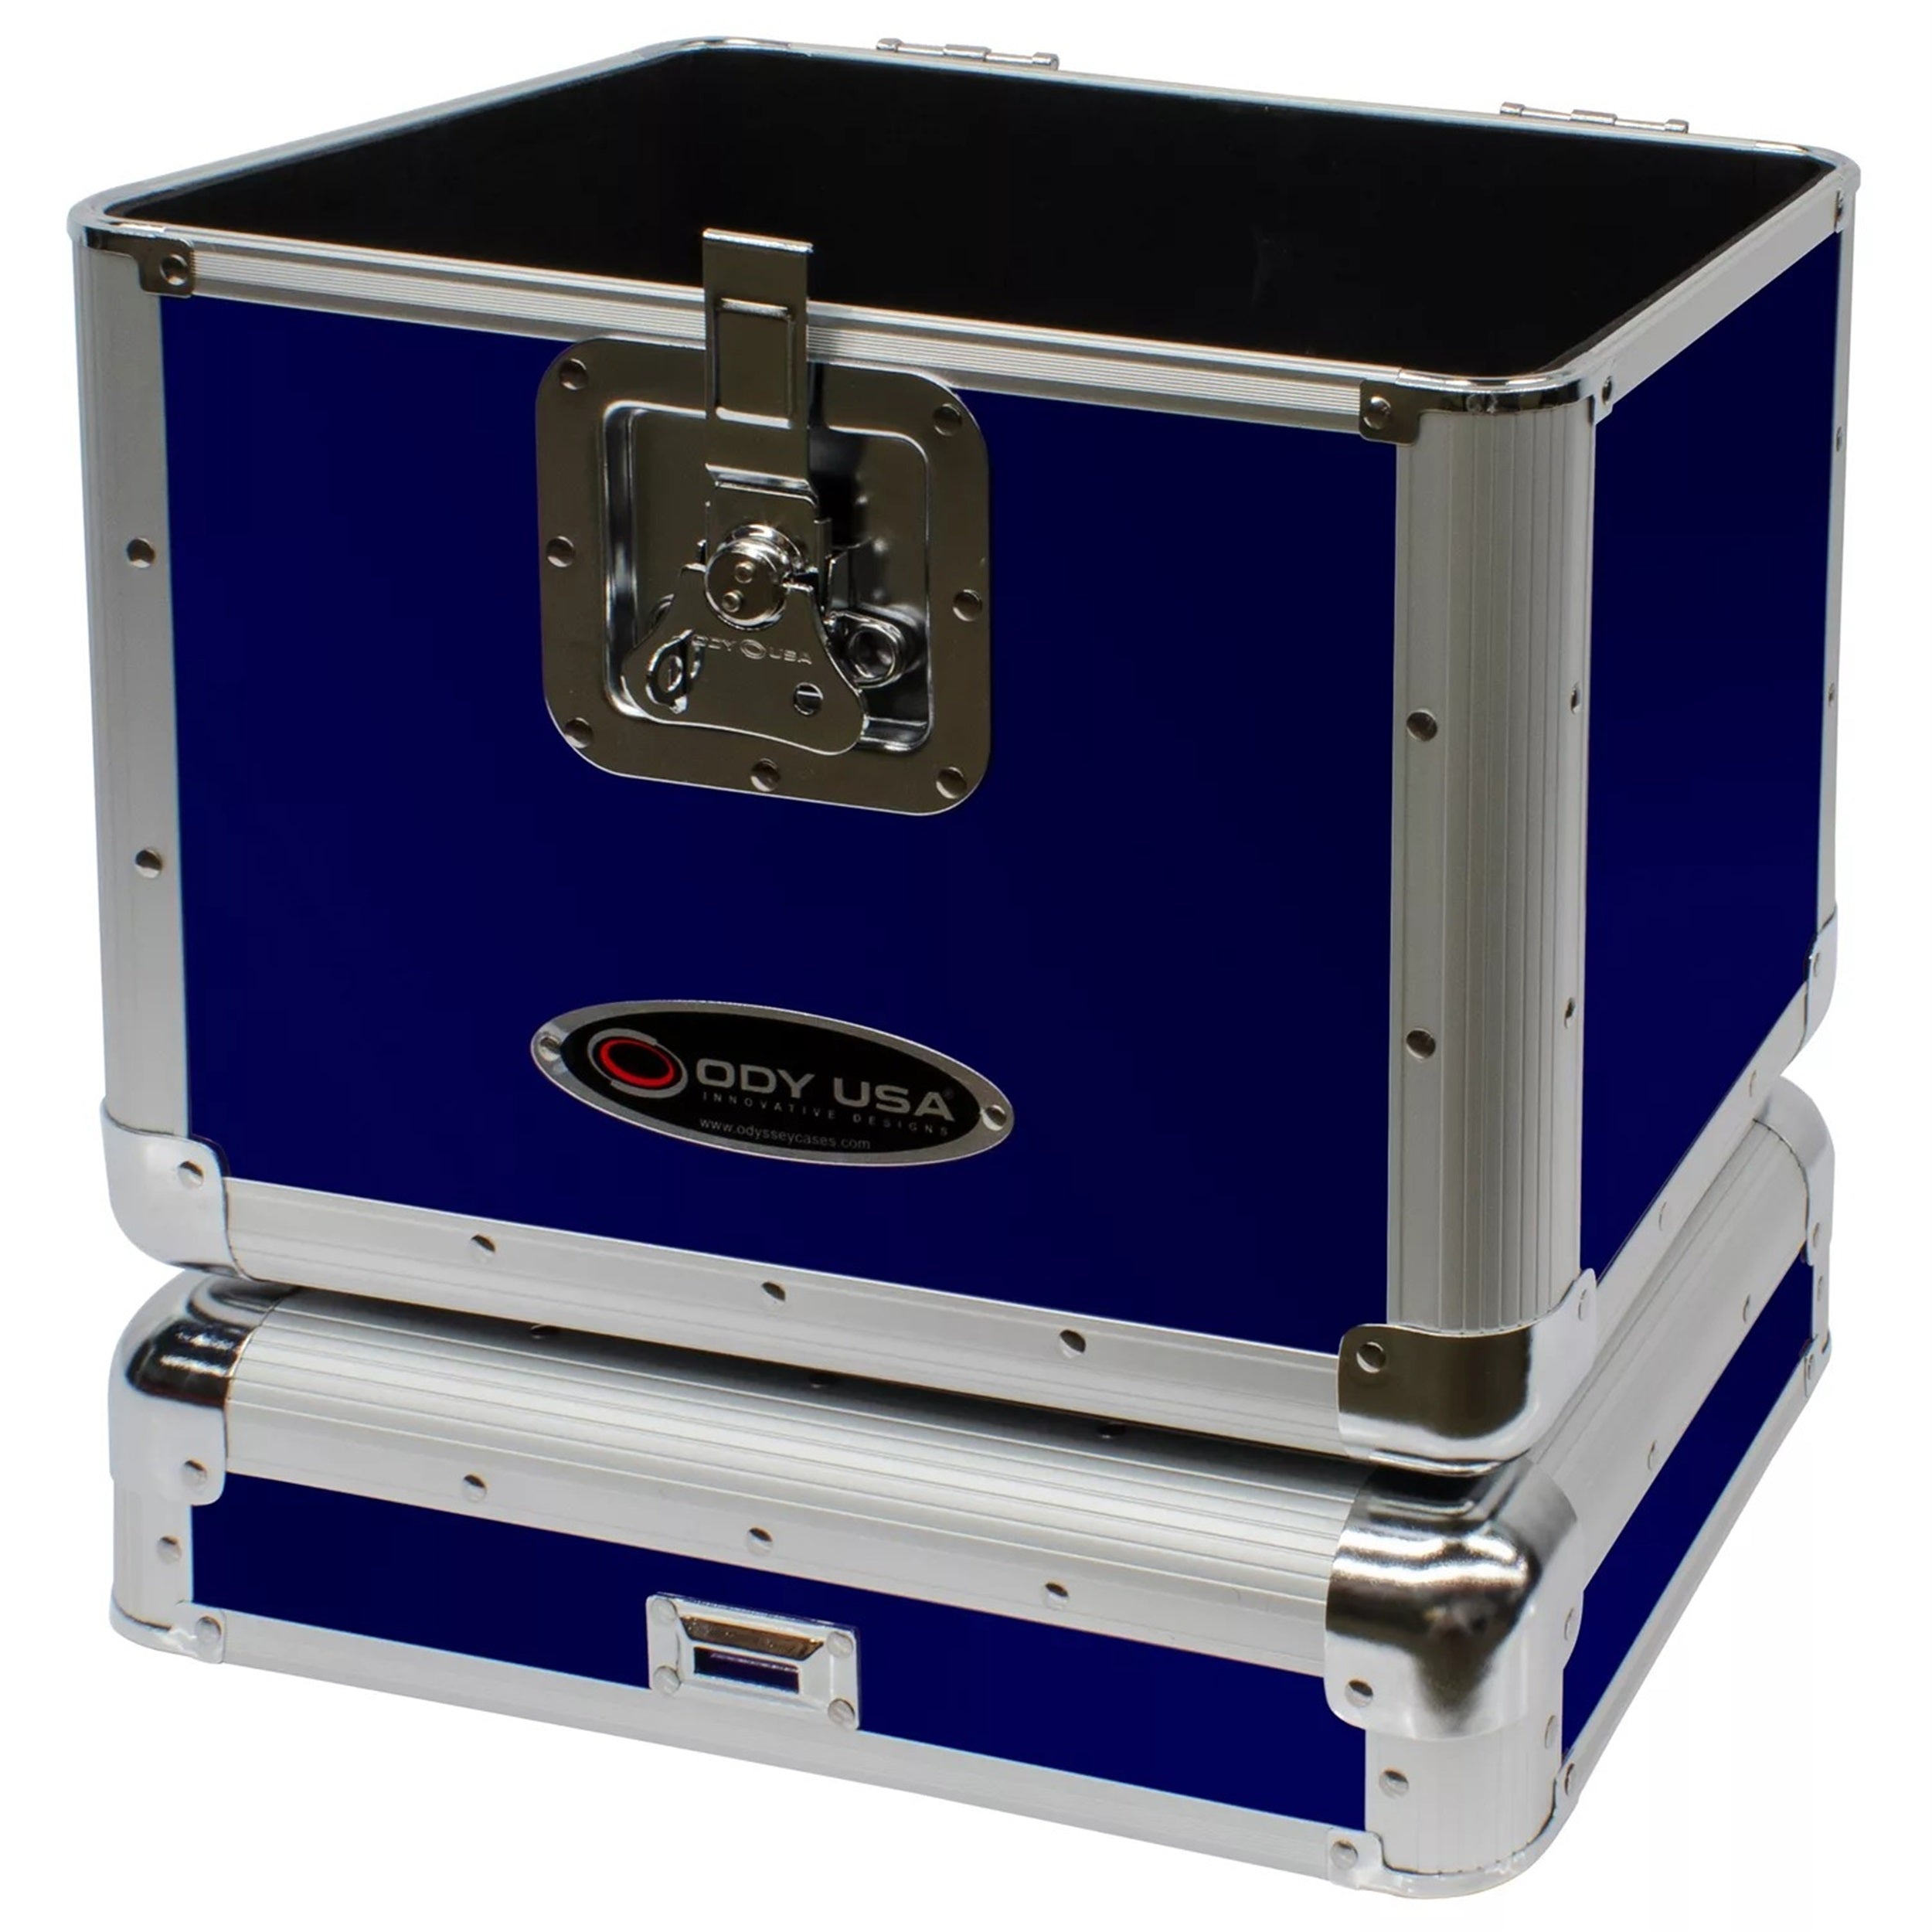 Odyssey KLP2BLU, KROM Series Blue Stackable Record / Utility Case for 70 12in Vinyl Records And LPs by Odyssey